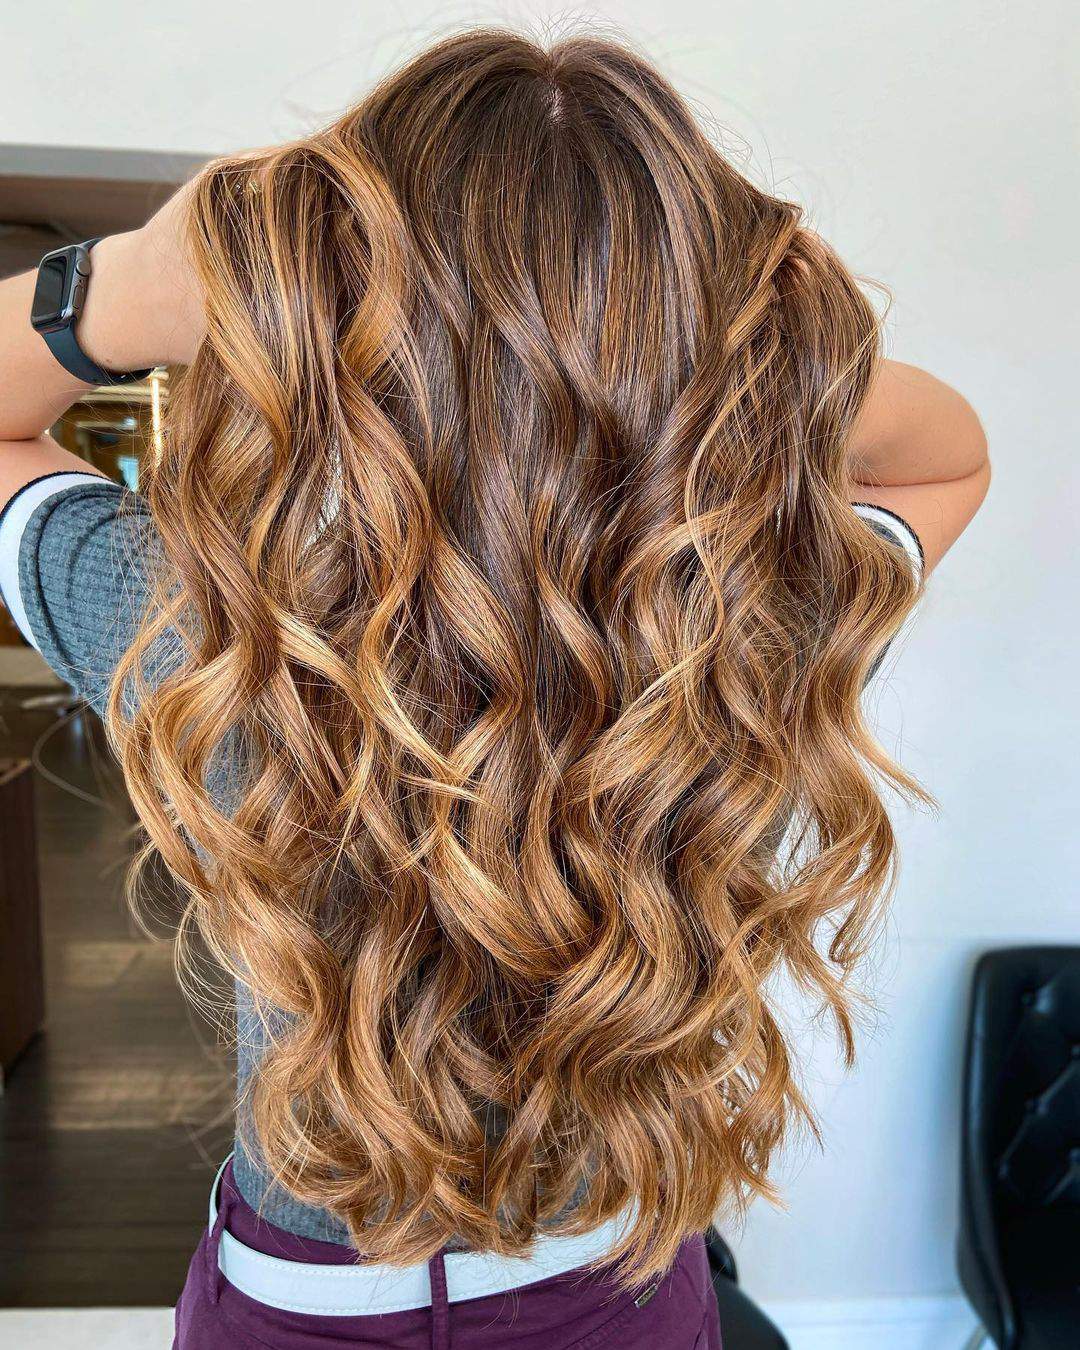 100+ Trendy Hairstyle Ideas For Women To Try In 2021 images 3